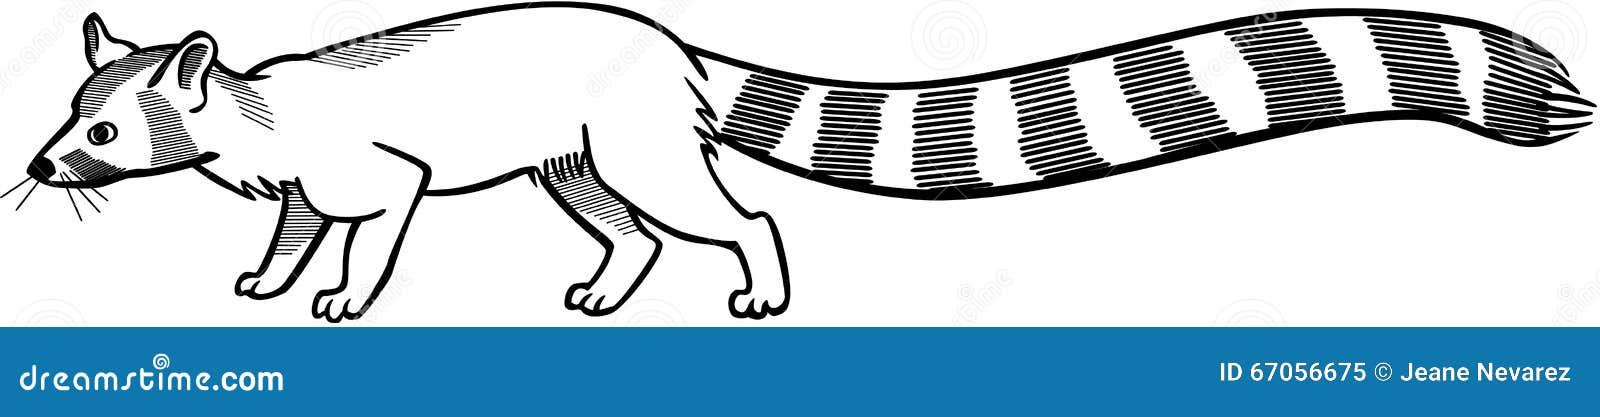 Ringtail Cat stock vector. Illustration of beast, drawing - 67056675